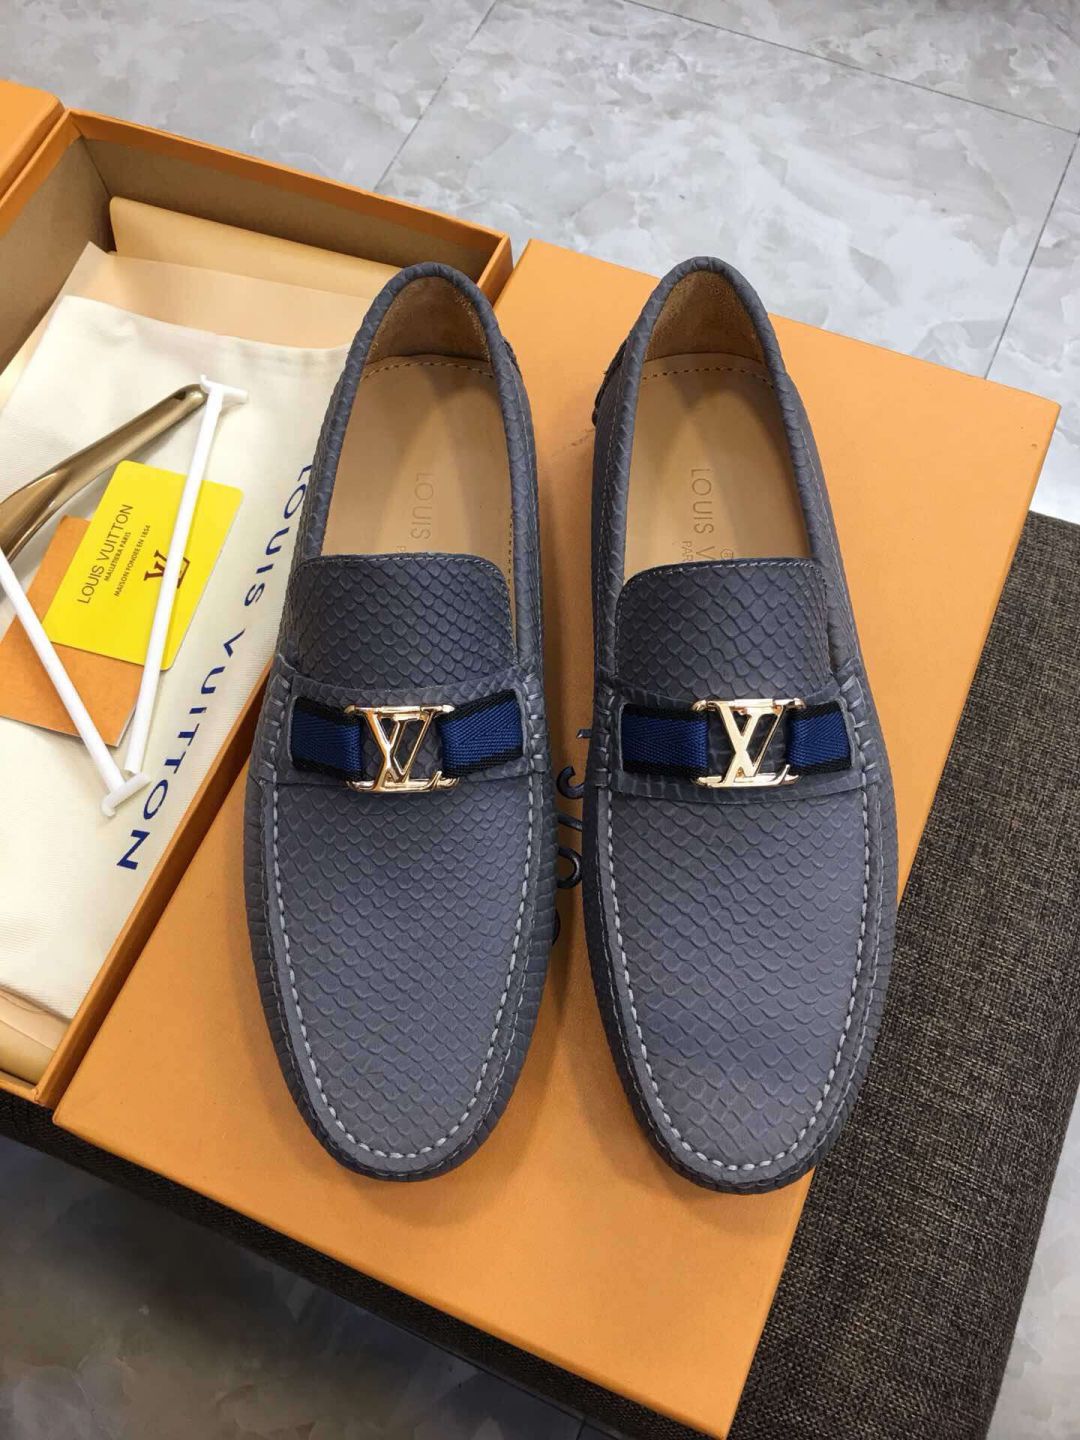 2018 LVsLV Causal Leather Shoes 1A37 Men Sandals